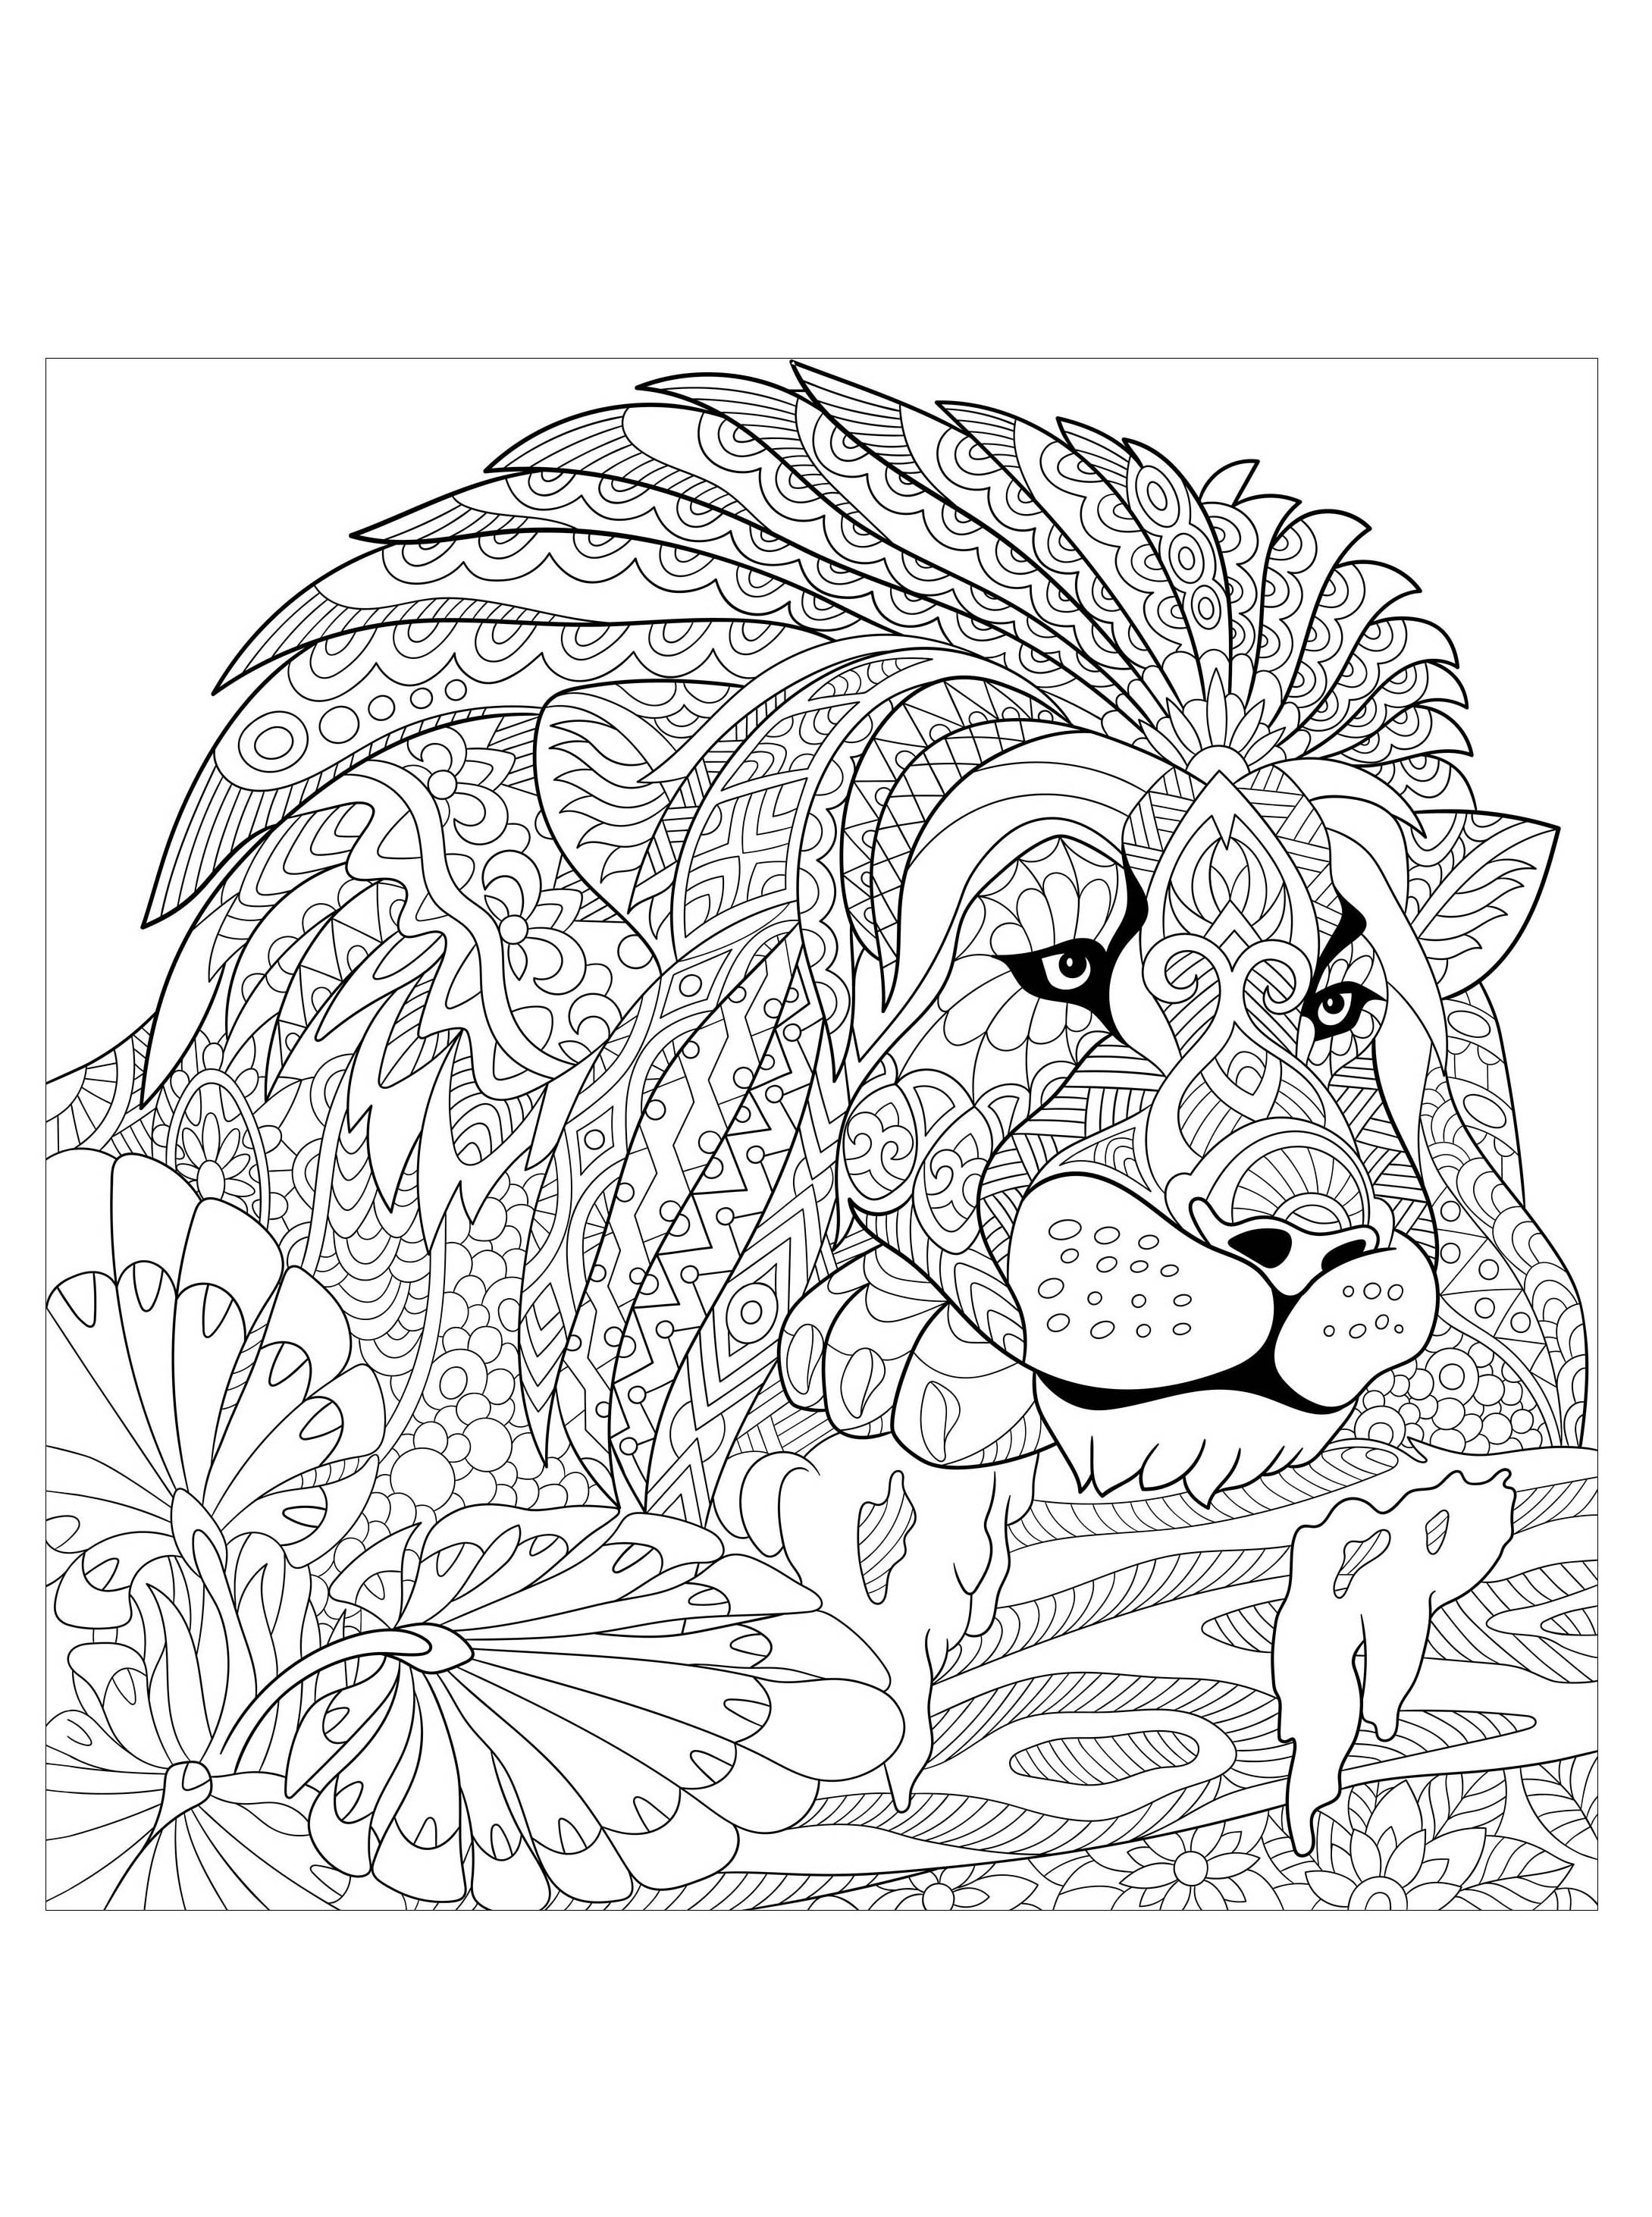 Lion king with patterns   Lions Adult Coloring Pages